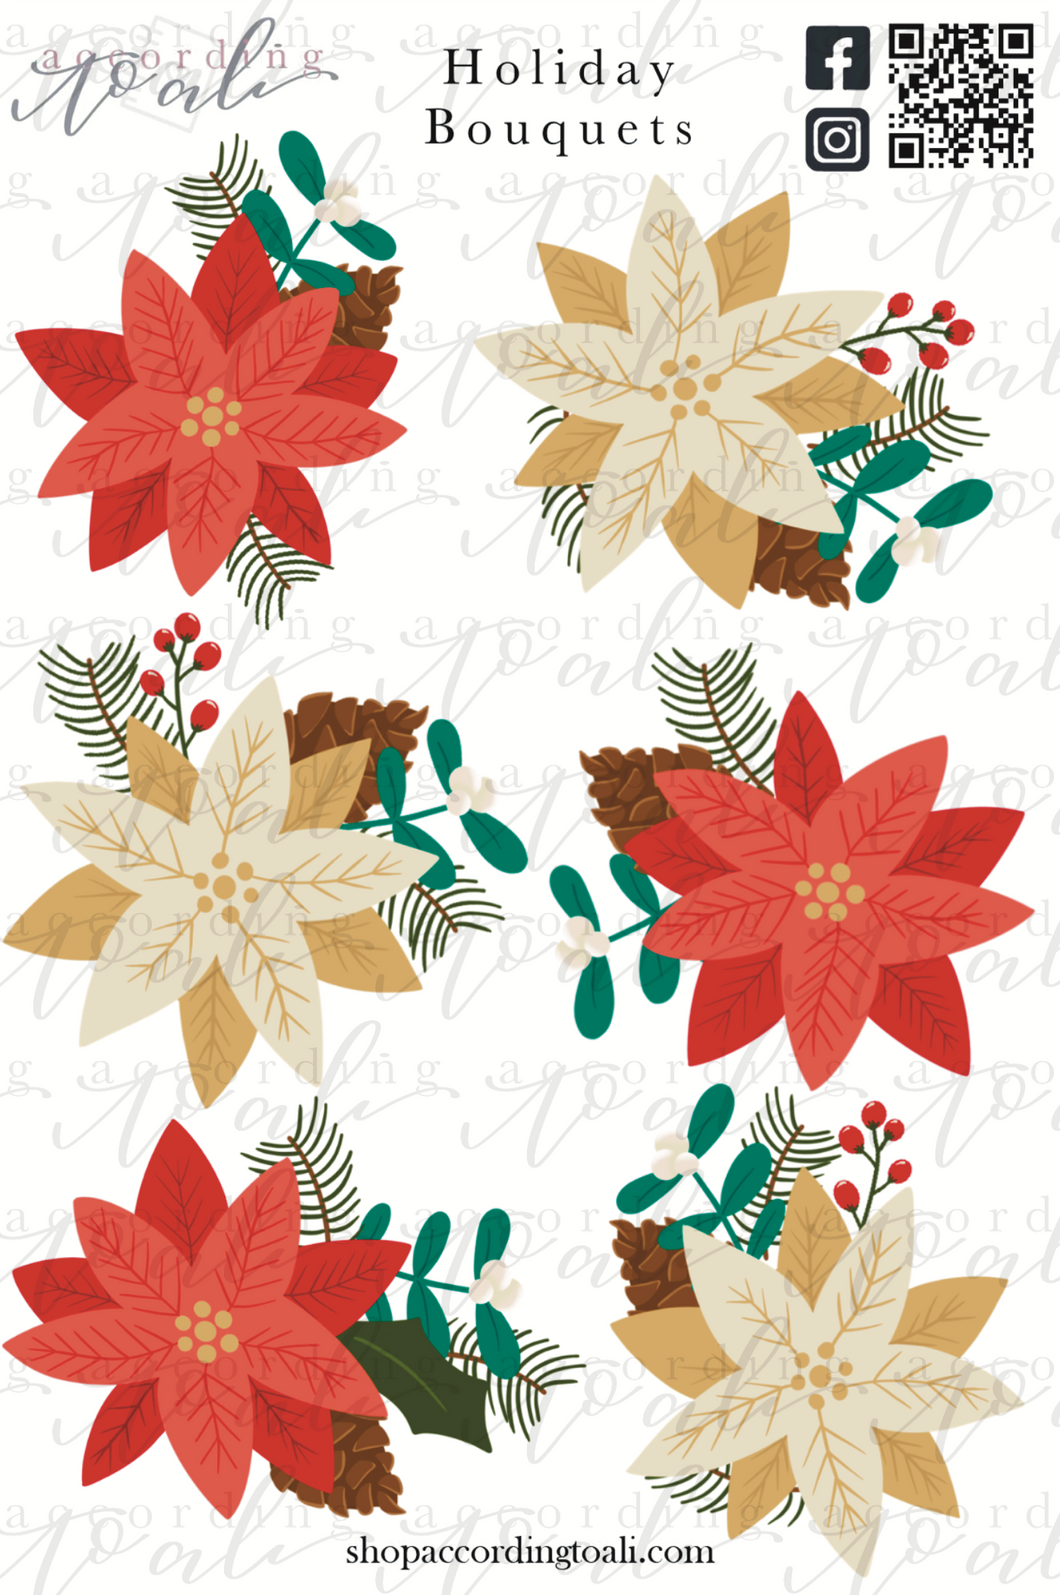 Holiday Bouquets Sticker Sheet